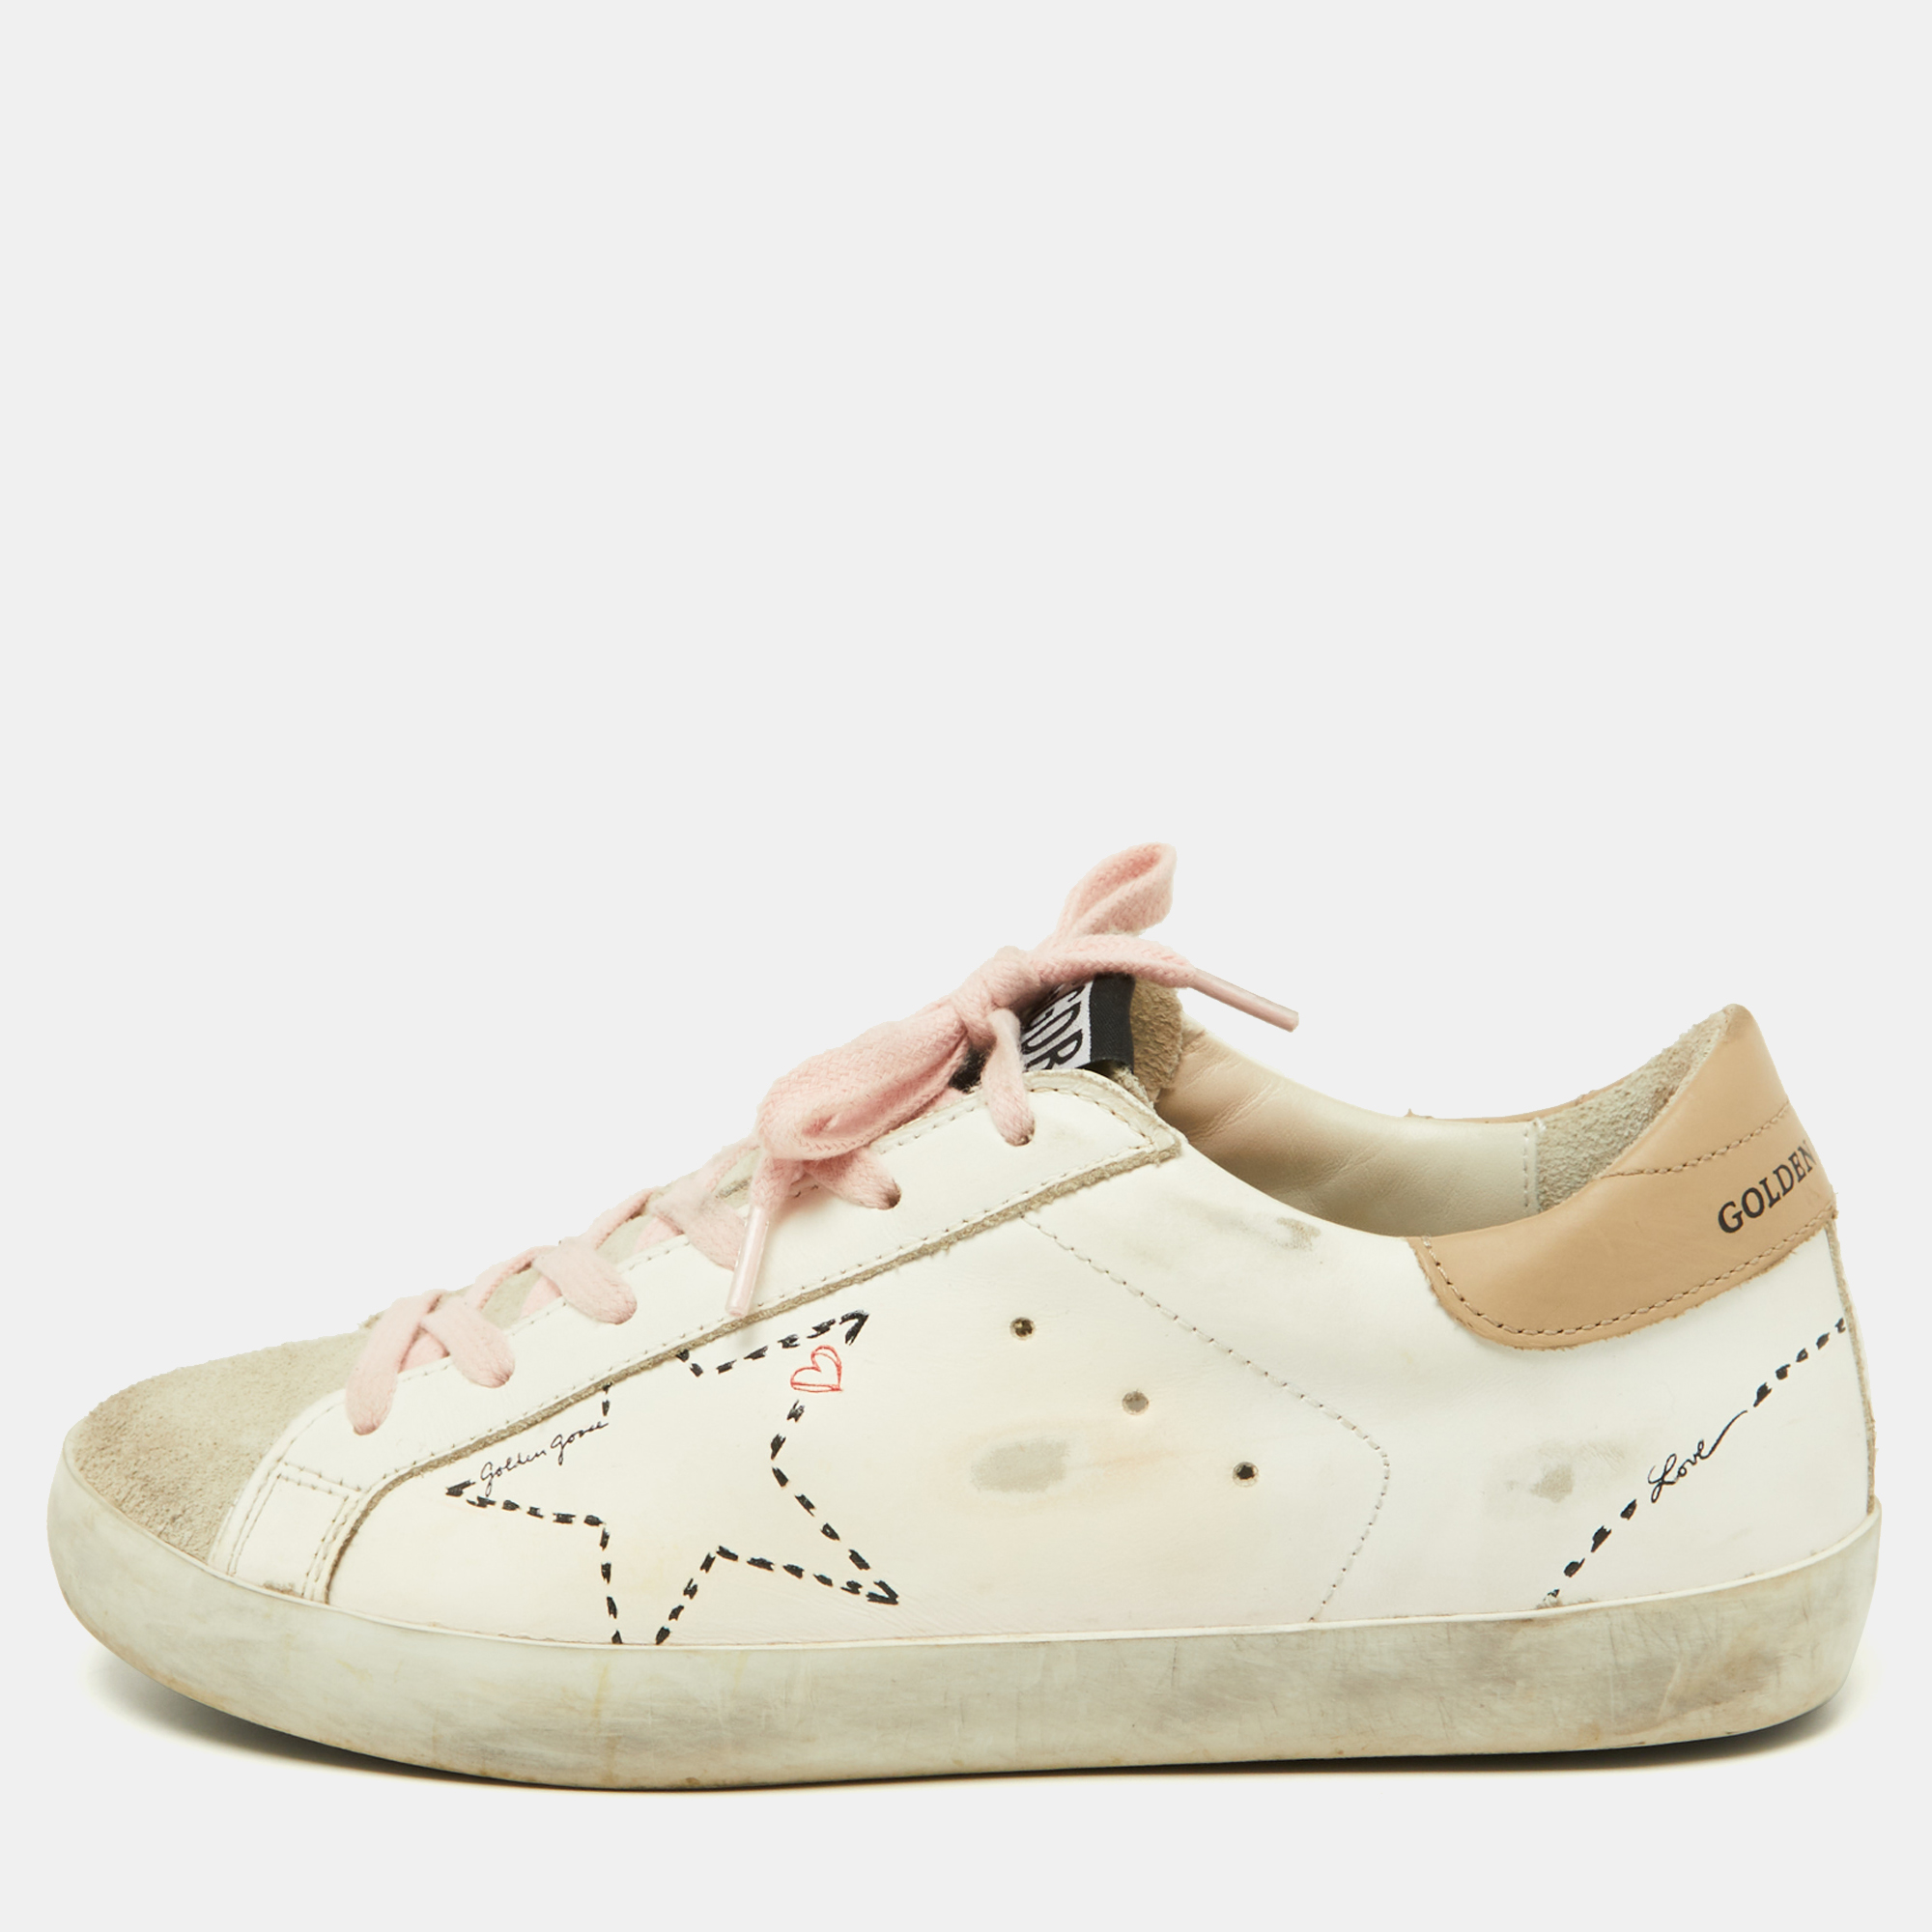 

Golden Goose White/Beige Leather Superstar Sneakers Size